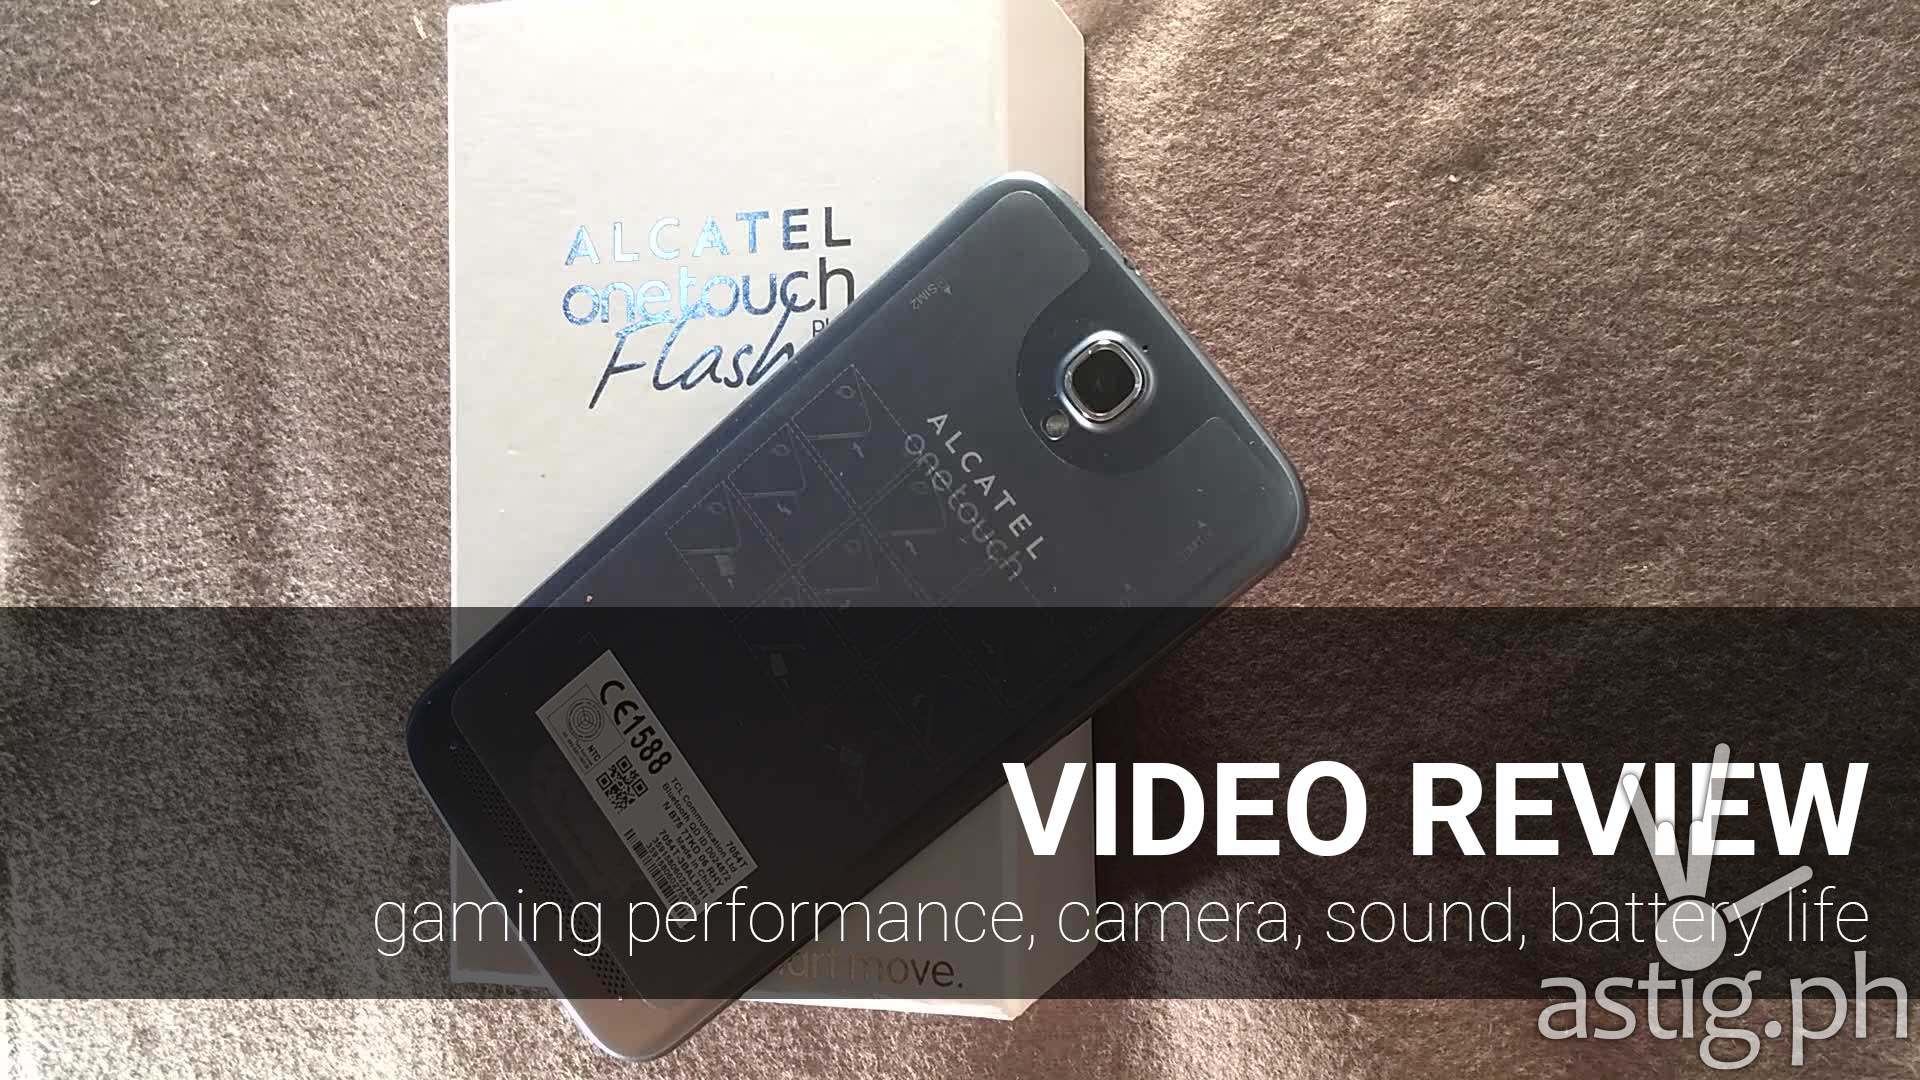 Alcatel ONETOUCH Flash Plus gaming performance, camera, audio, battery life